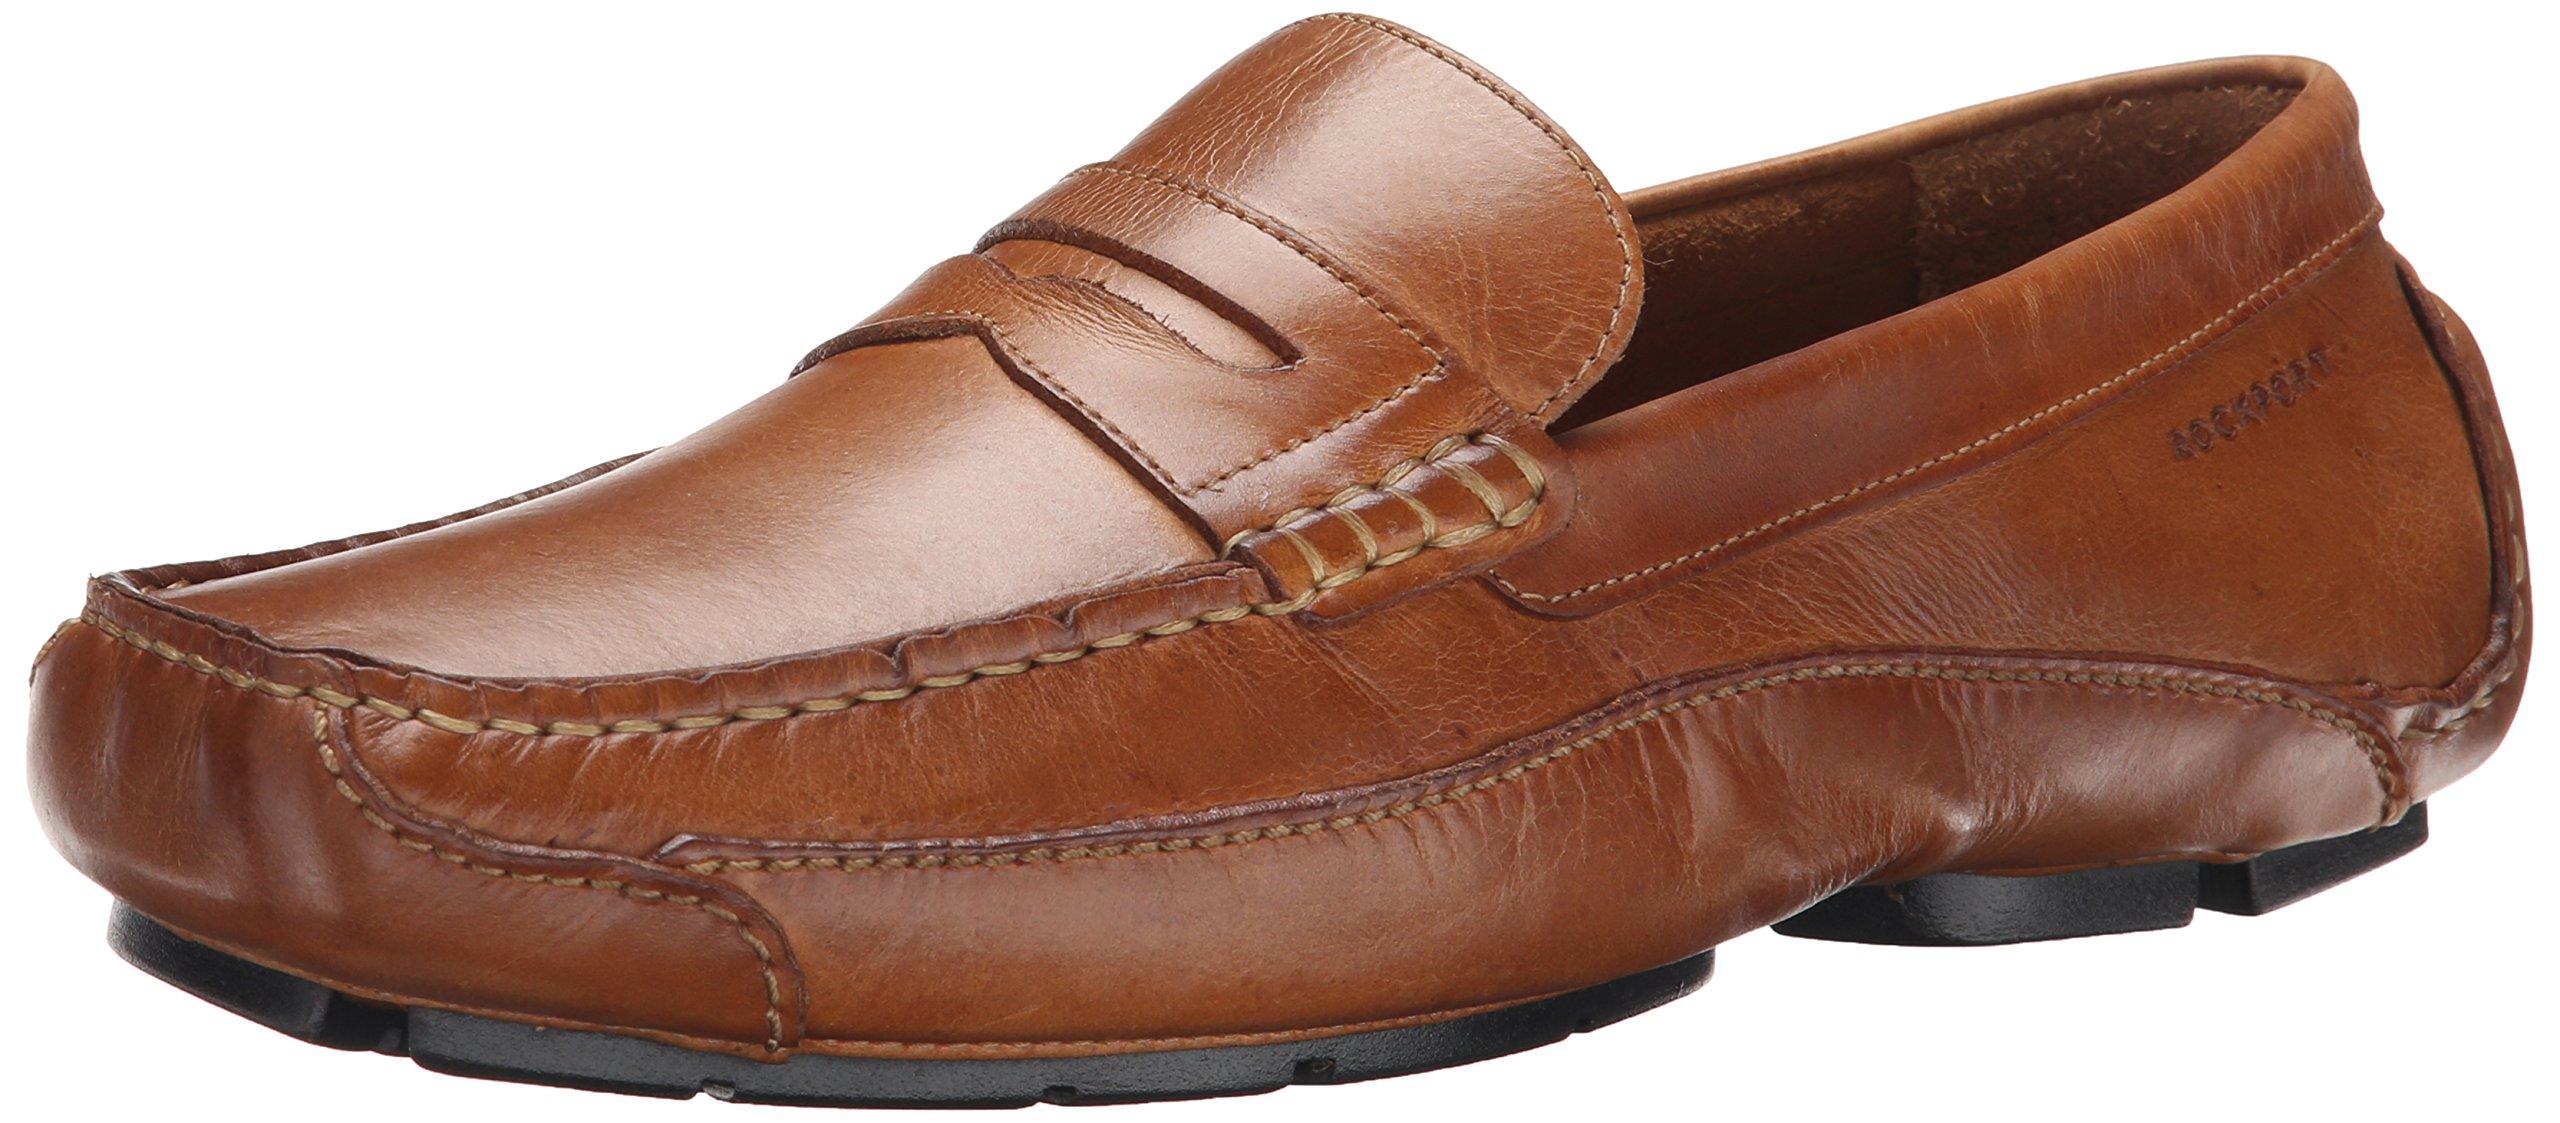 Rockport Suede Lc Penny Shoes in Tan Leather (Brown) for Men - Save 30% ...